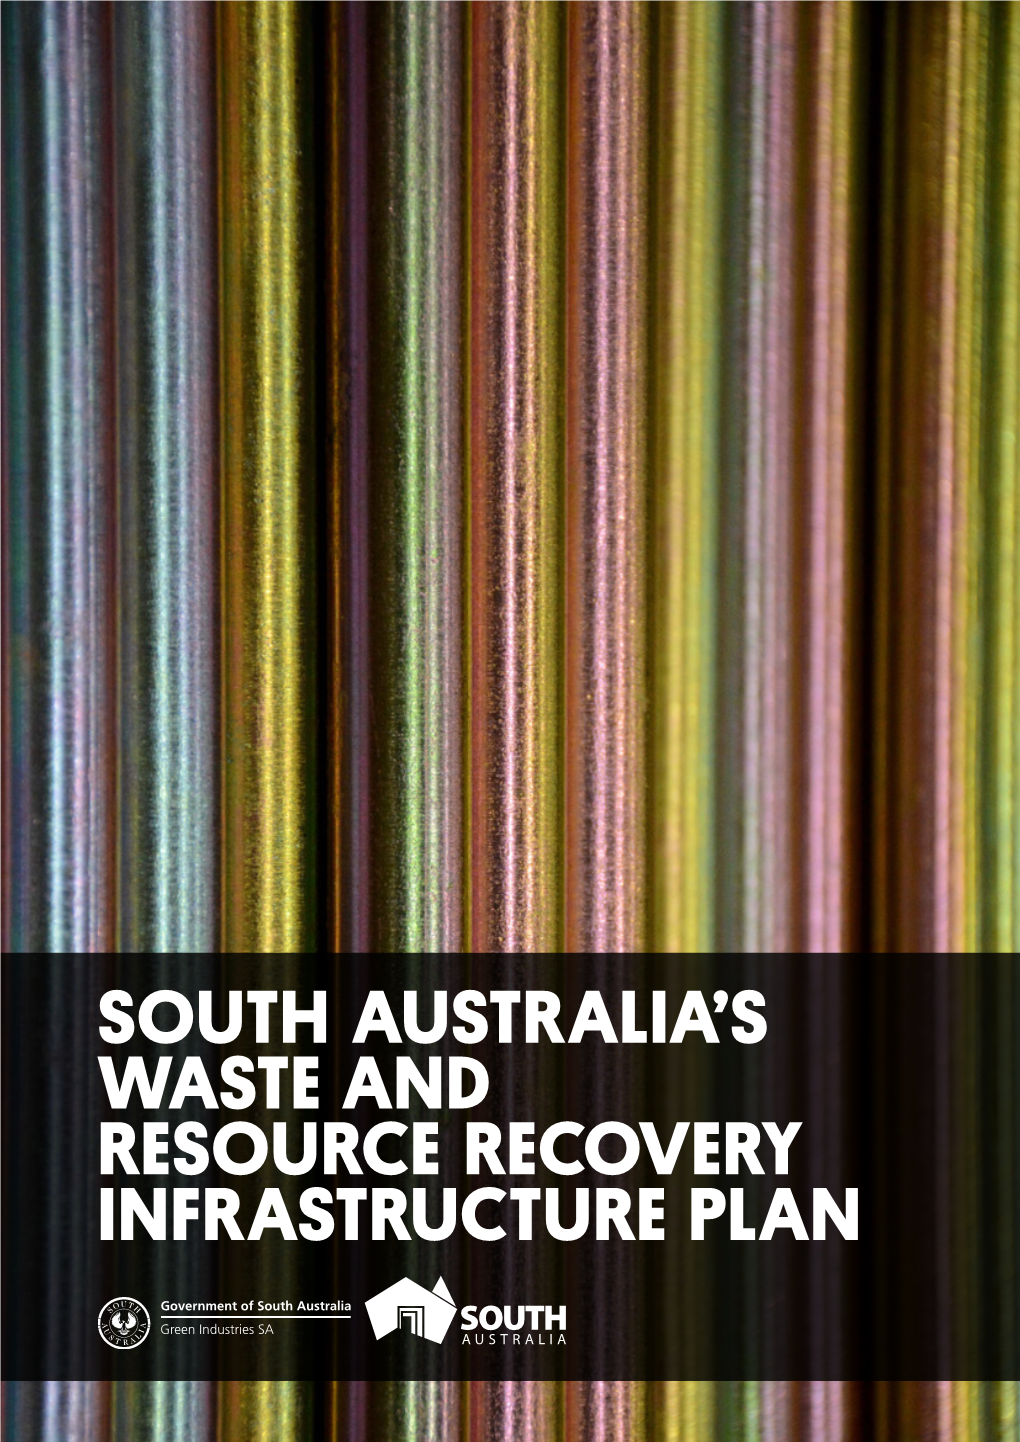 South Australia's Waste and Resource Recovery